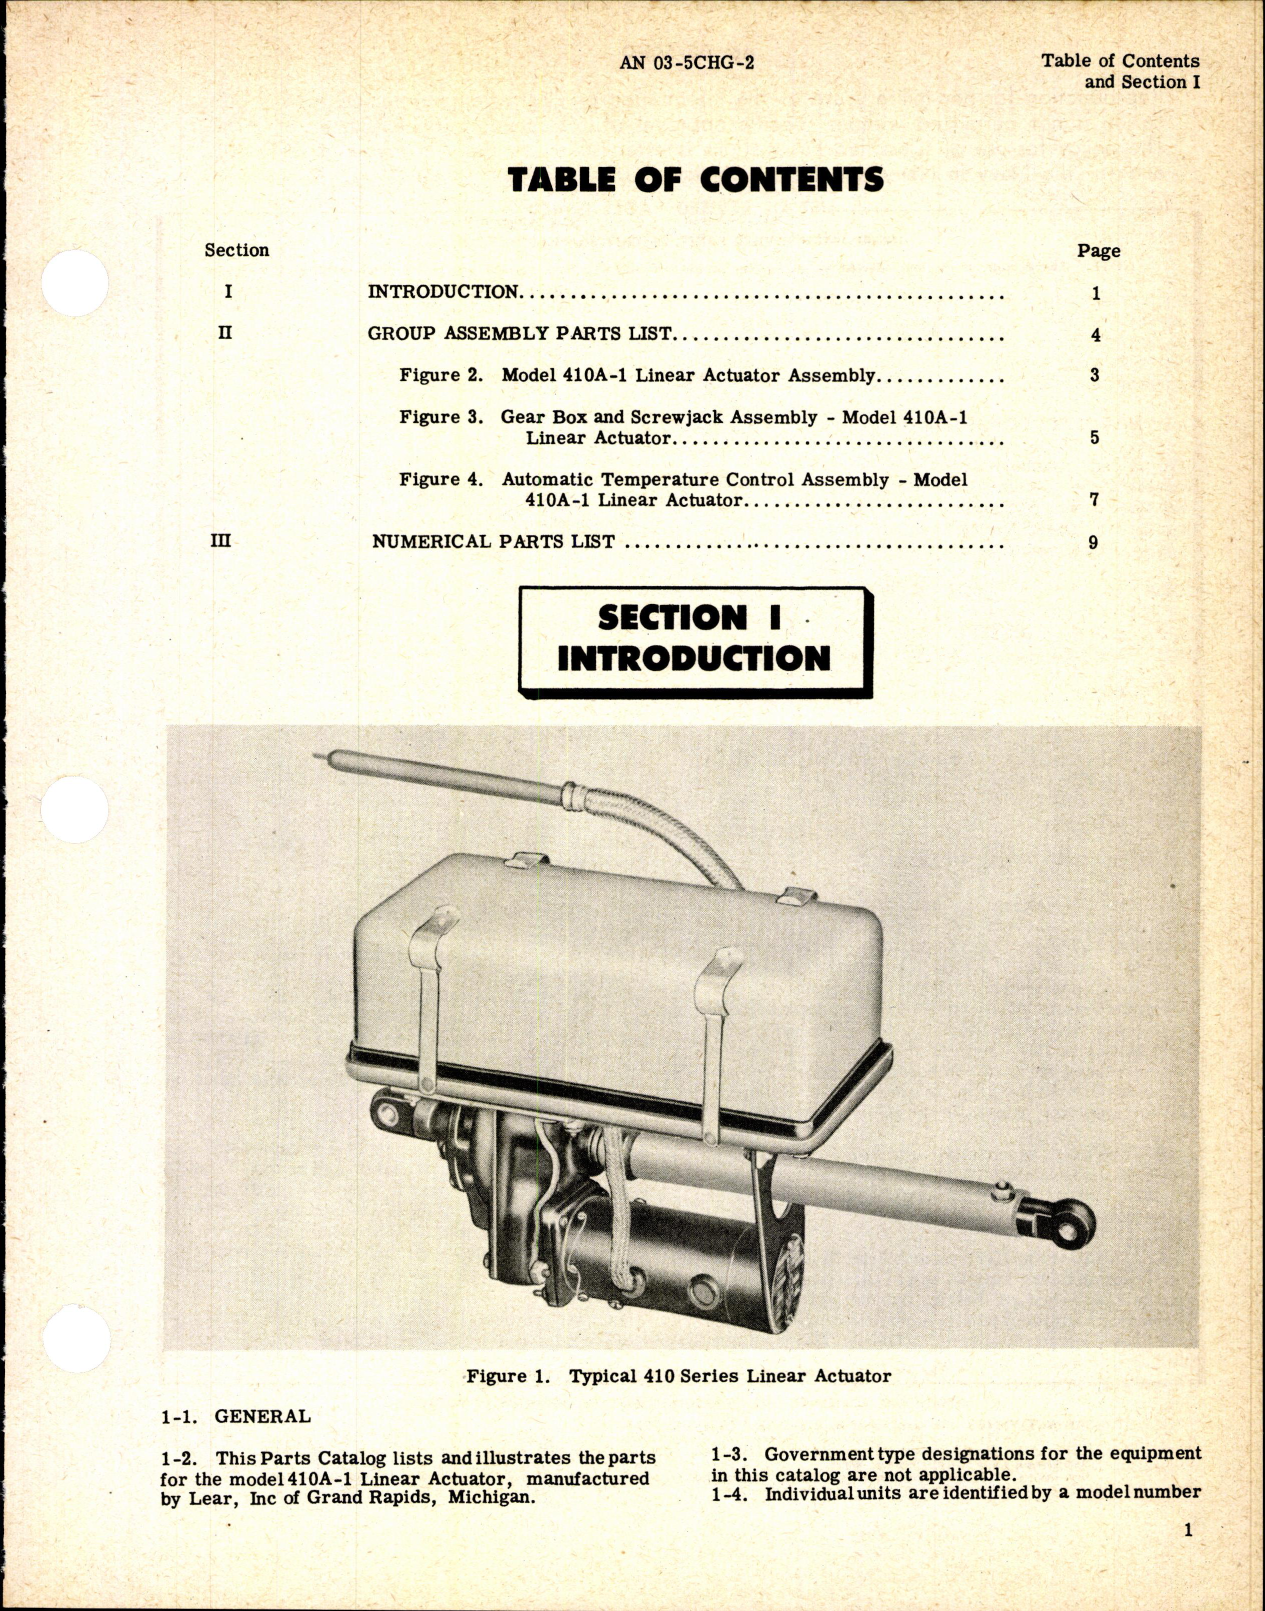 Sample page 3 from AirCorps Library document: Parts Catalog for Linear Actuator Assembly 410 Series